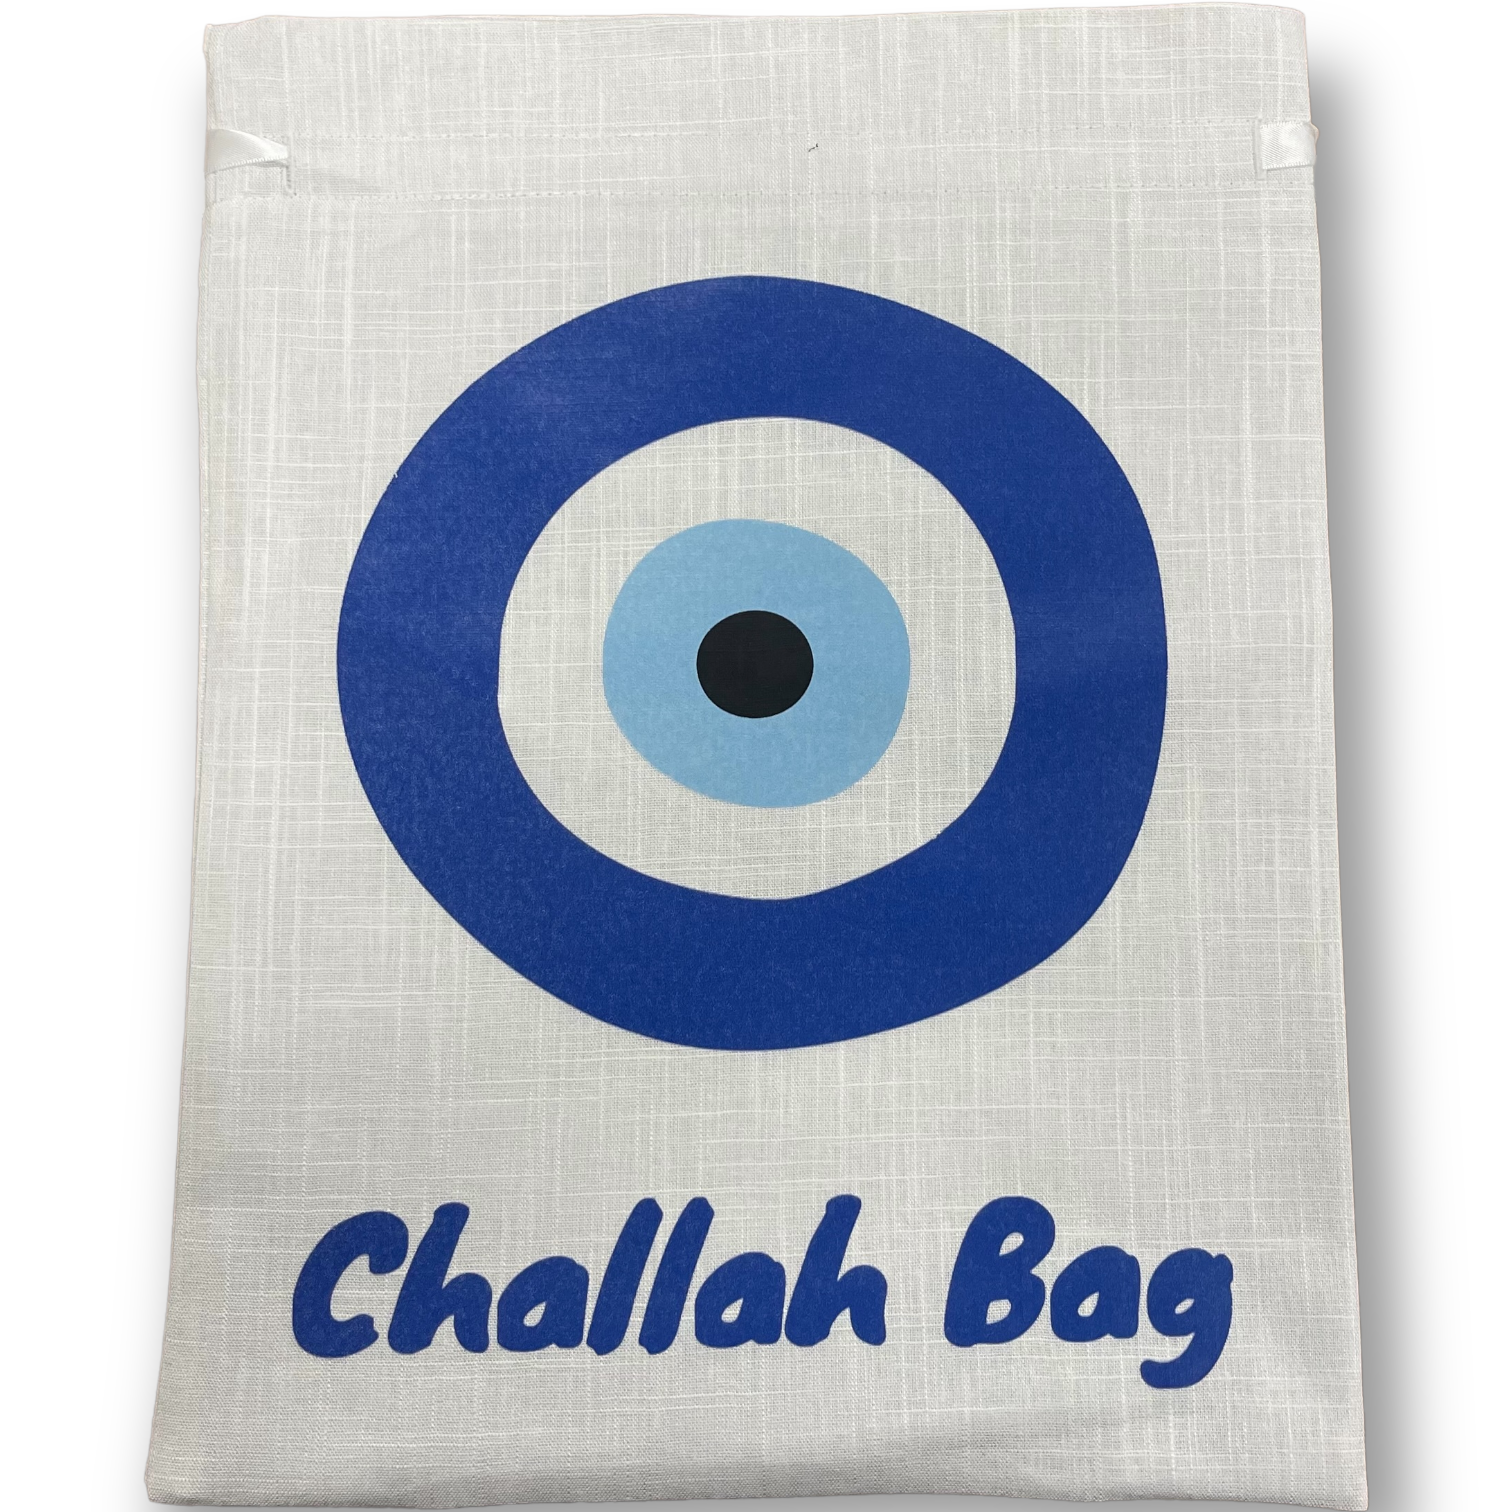 30 x 40cm Printed Linen Challah bag with satin lining and closing